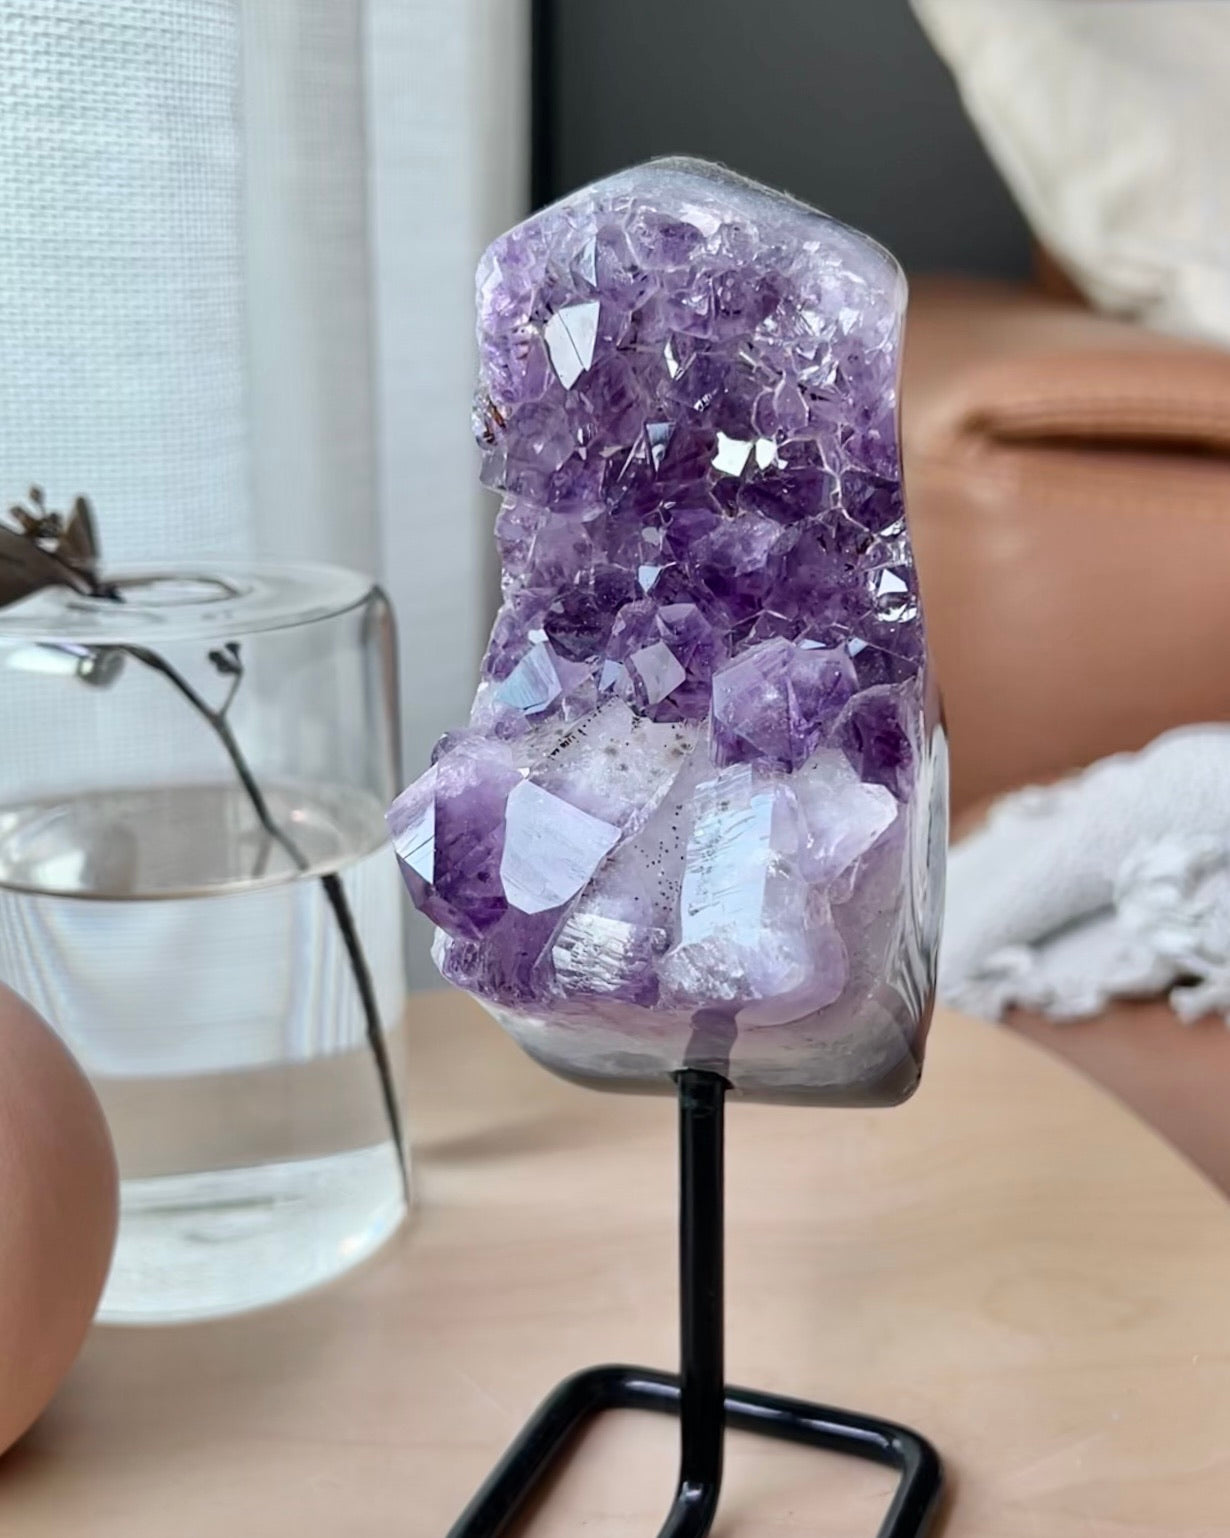 [Gaile] Amethyst Full Polished On Stand